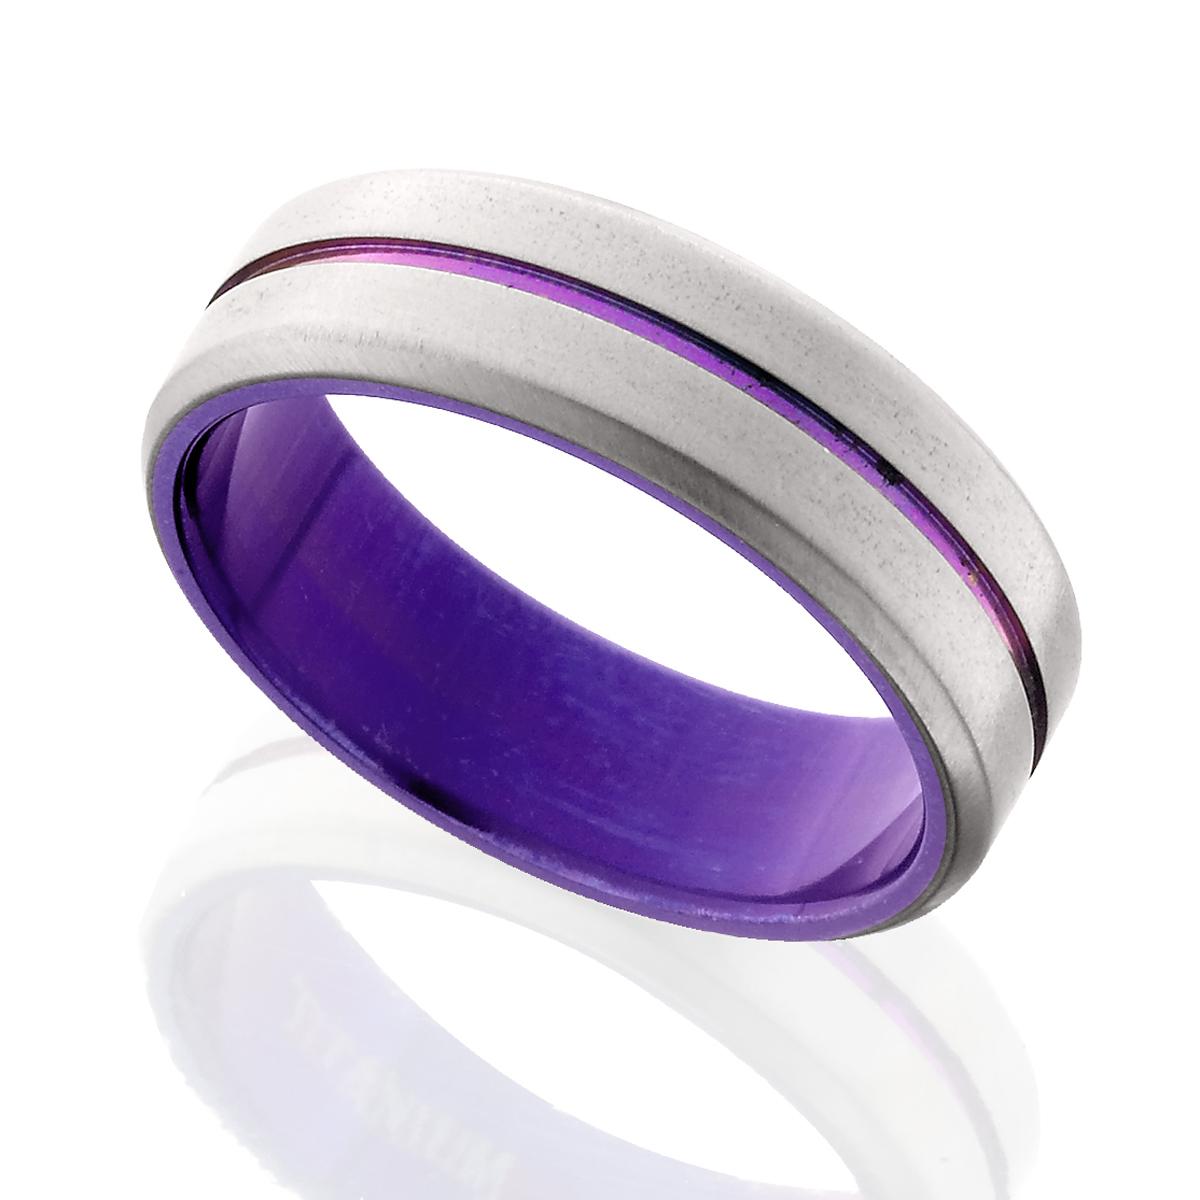 Wedding Band available in your choice of metal & width    Wedding Band